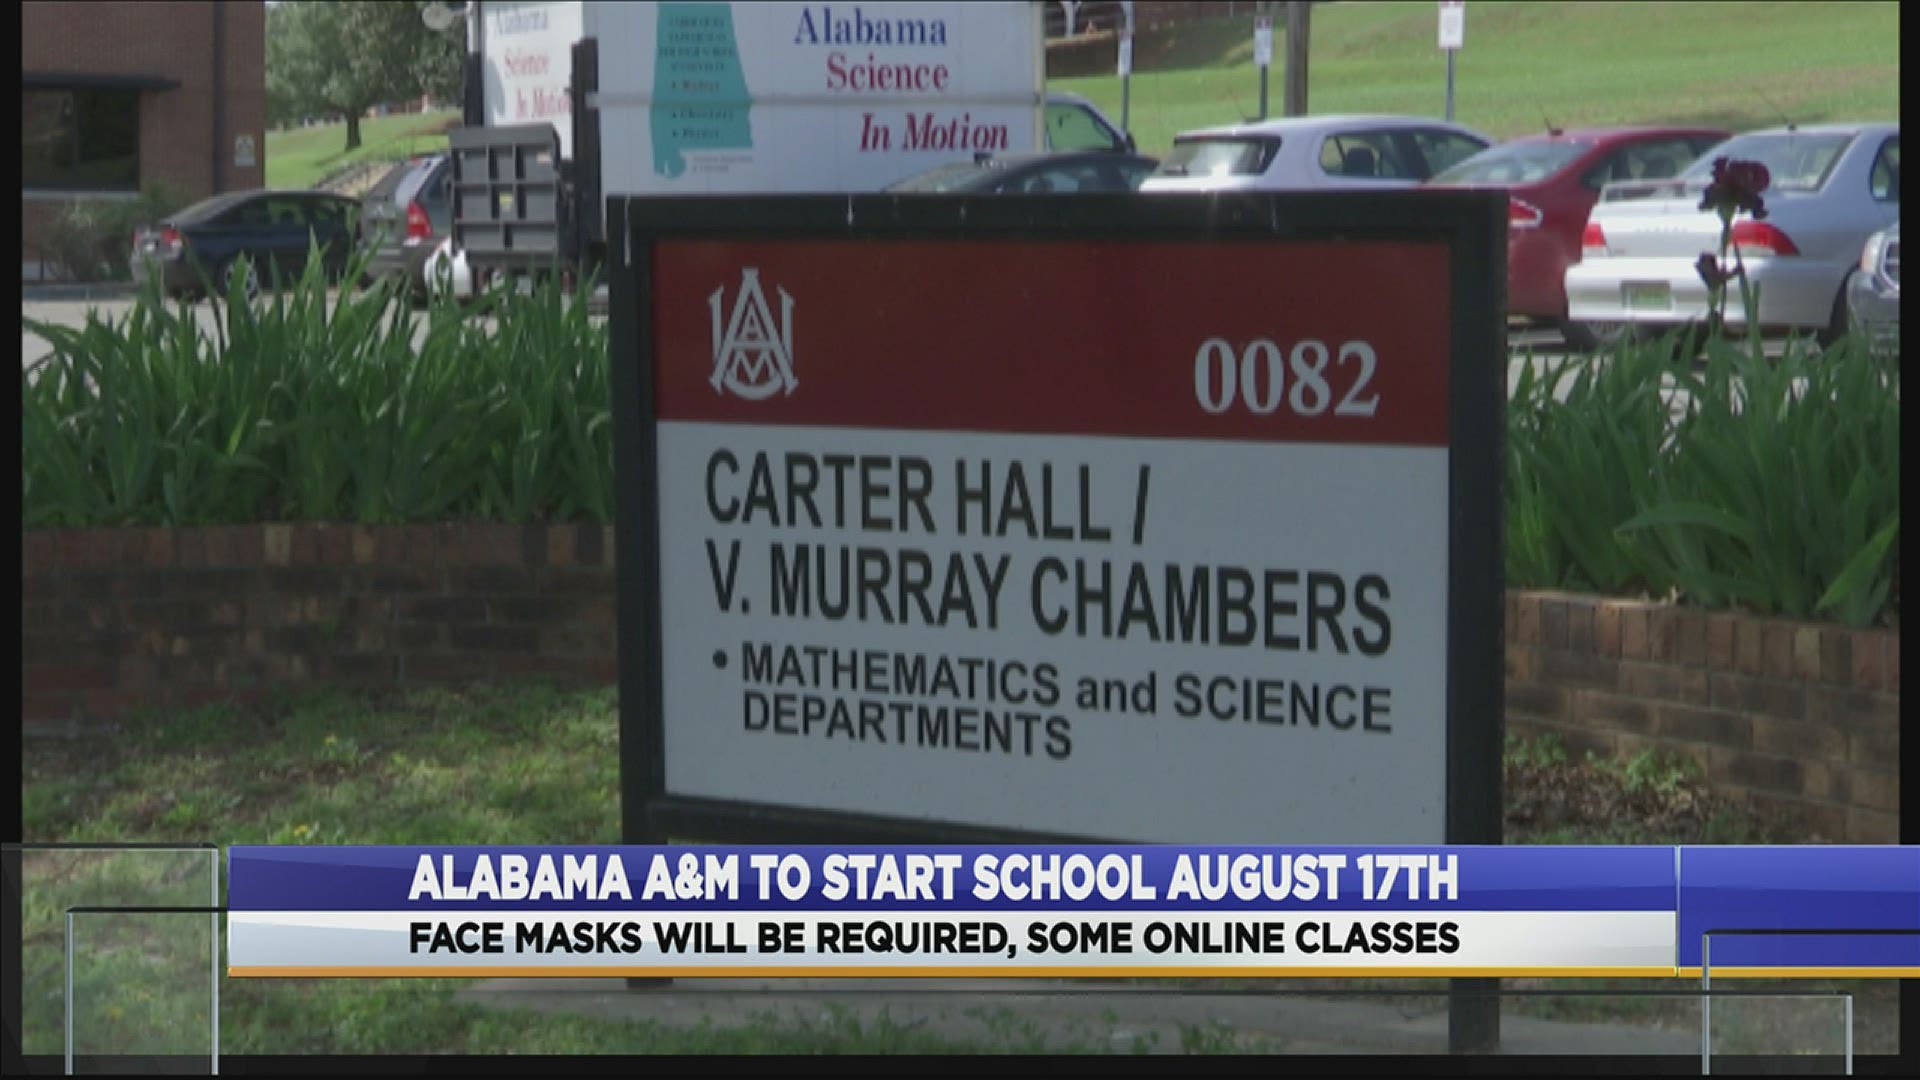 Alabama A&M will start in-person and online classes on August 17.